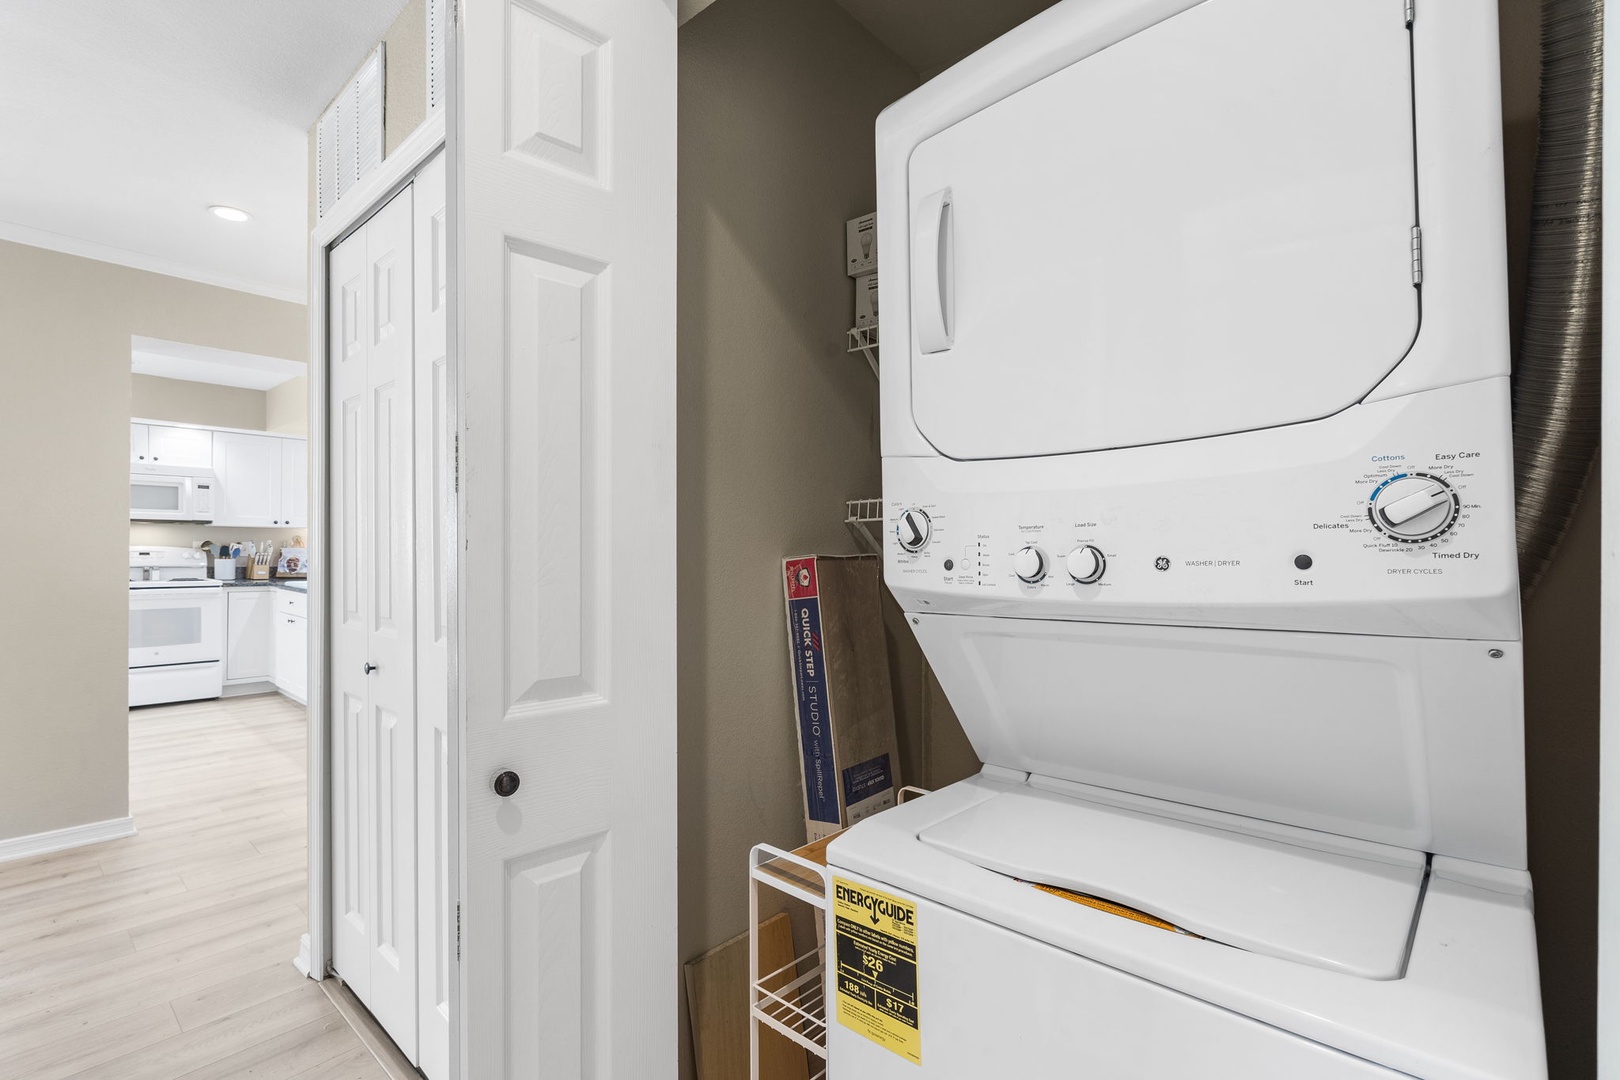 Private laundry is neatly tucked away in a hall closet